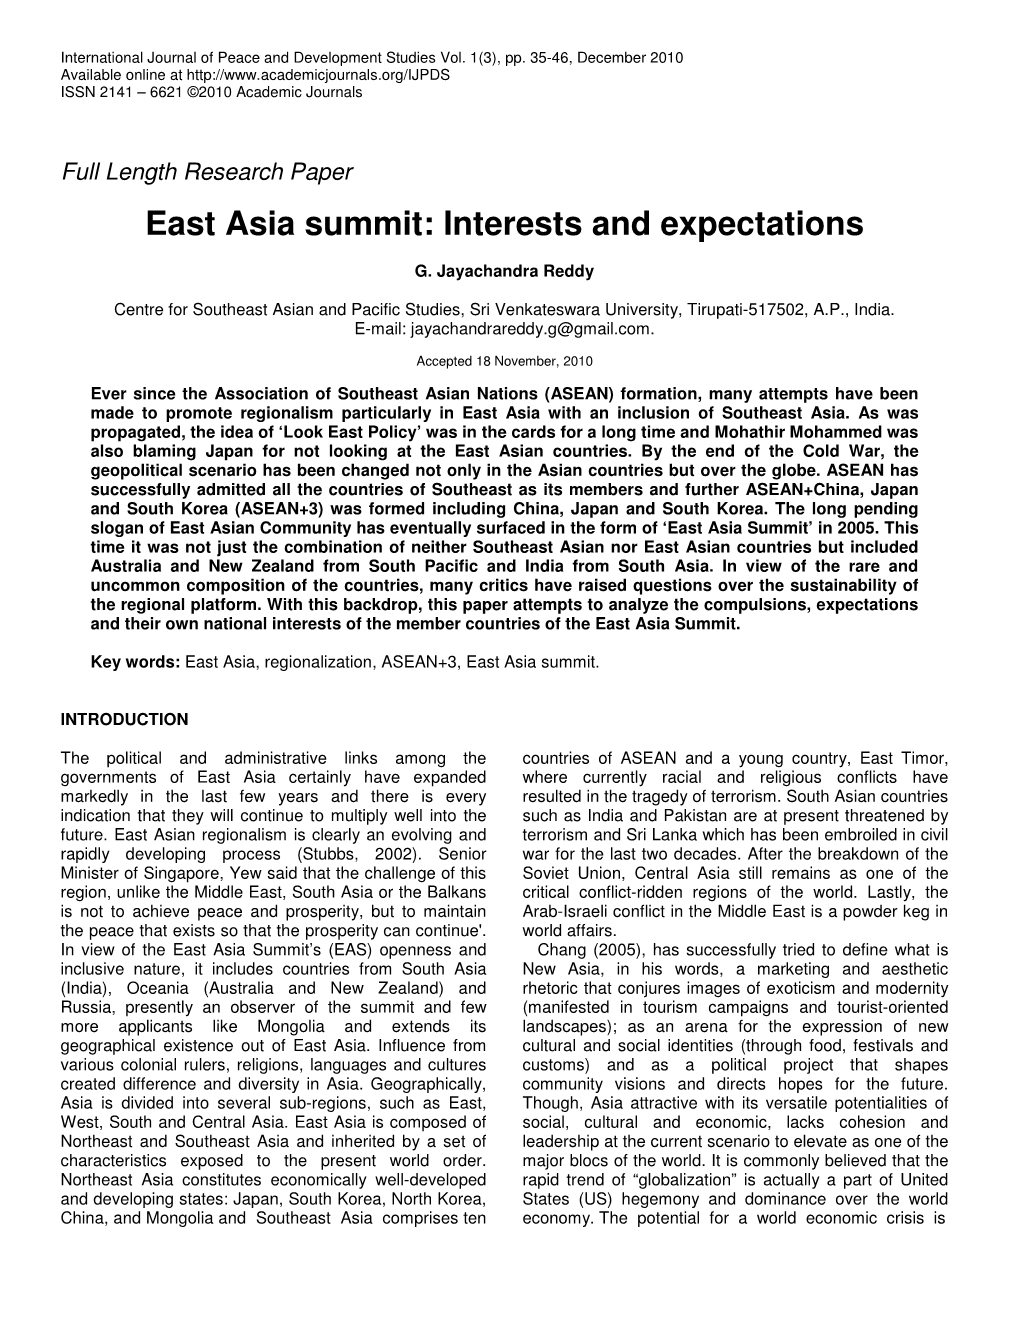 East Asia Summit: Interests and Expectations